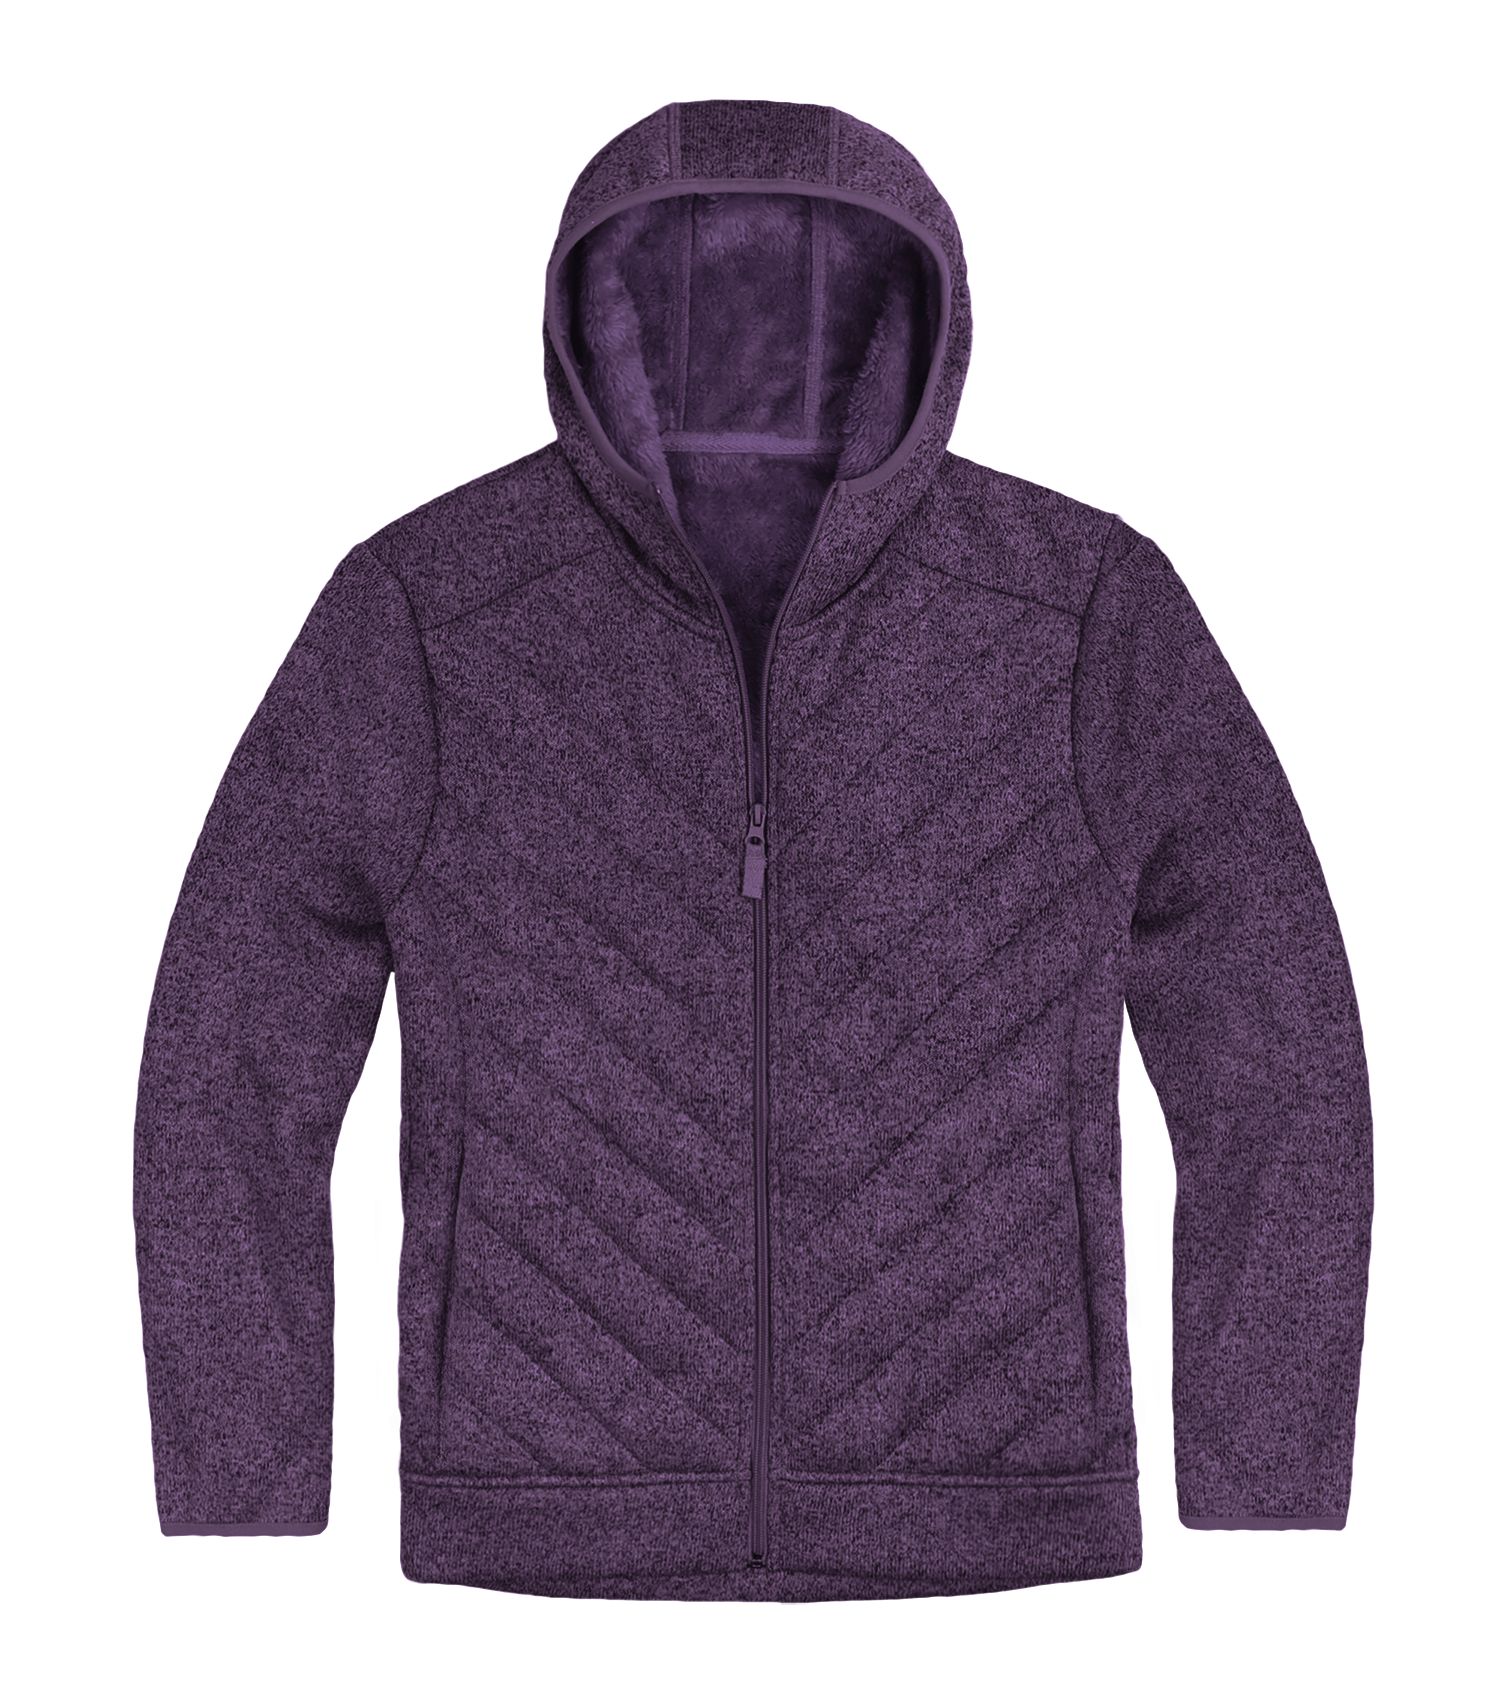 Victory Outfitters Men's Fleece Zip Up Hoodie with Heavy Duty Sherpa Lining